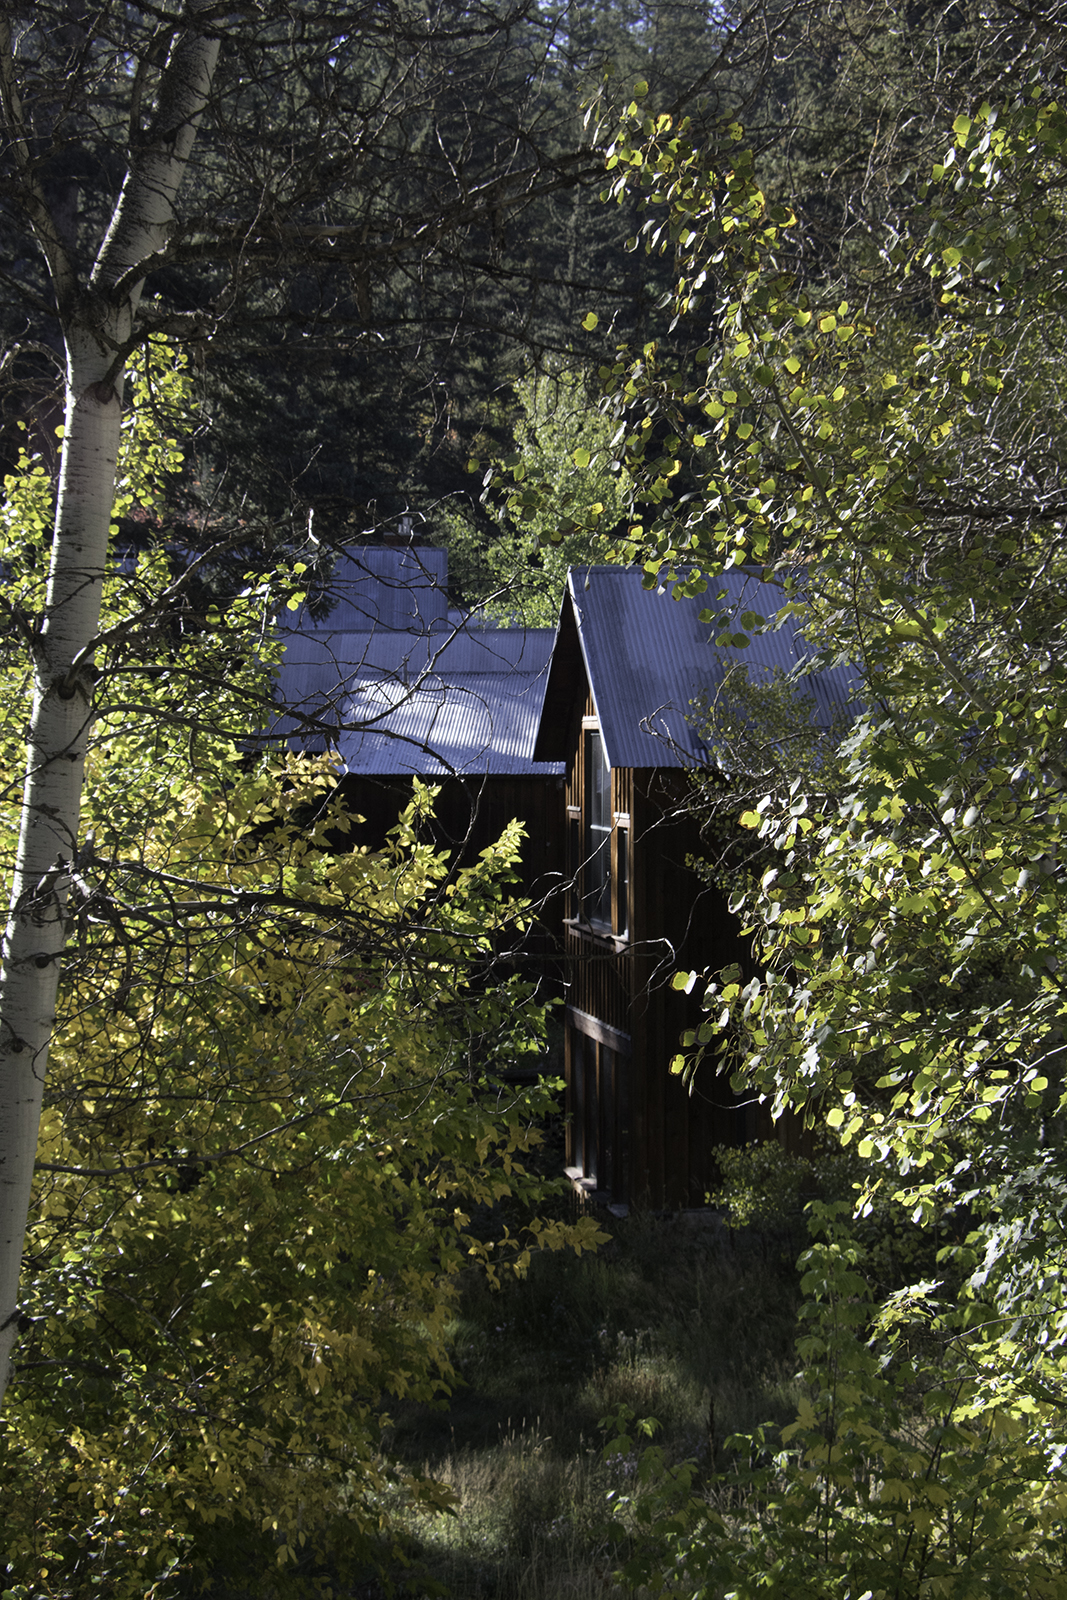 One of the cabins at the Sundance Mountain Resort. Photograph, Ann Fisher.